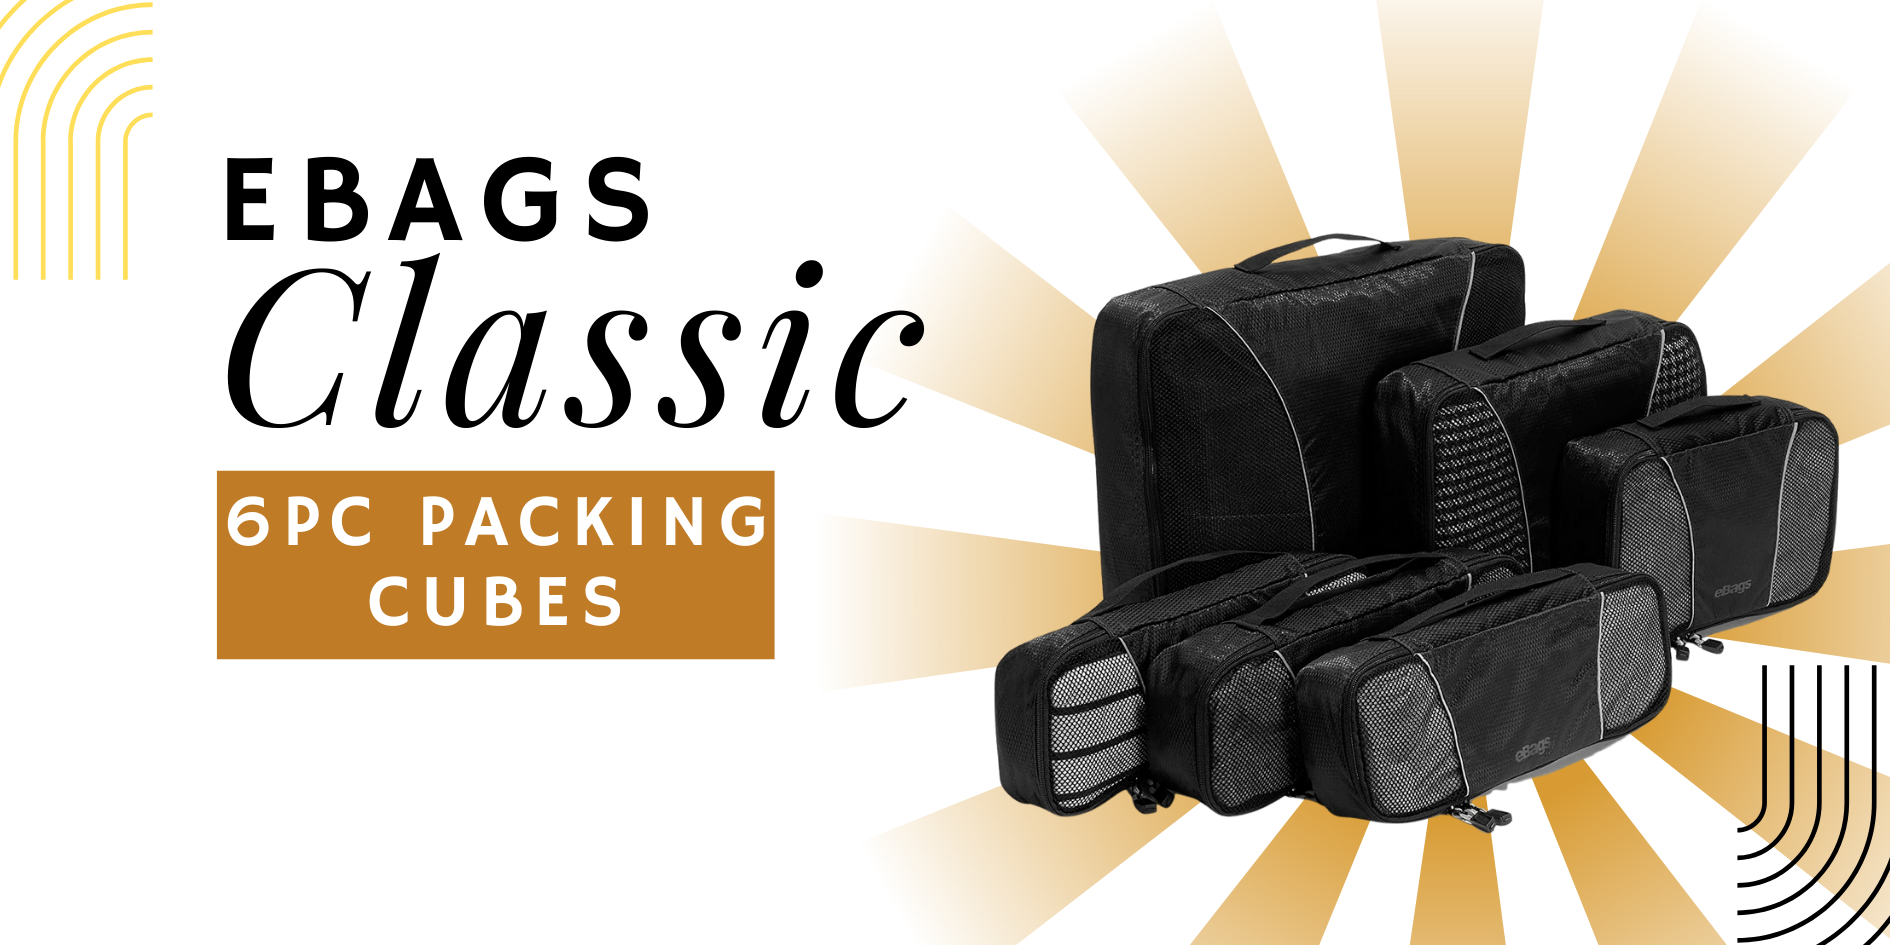 eBags Classic 6pc Packing Cubes